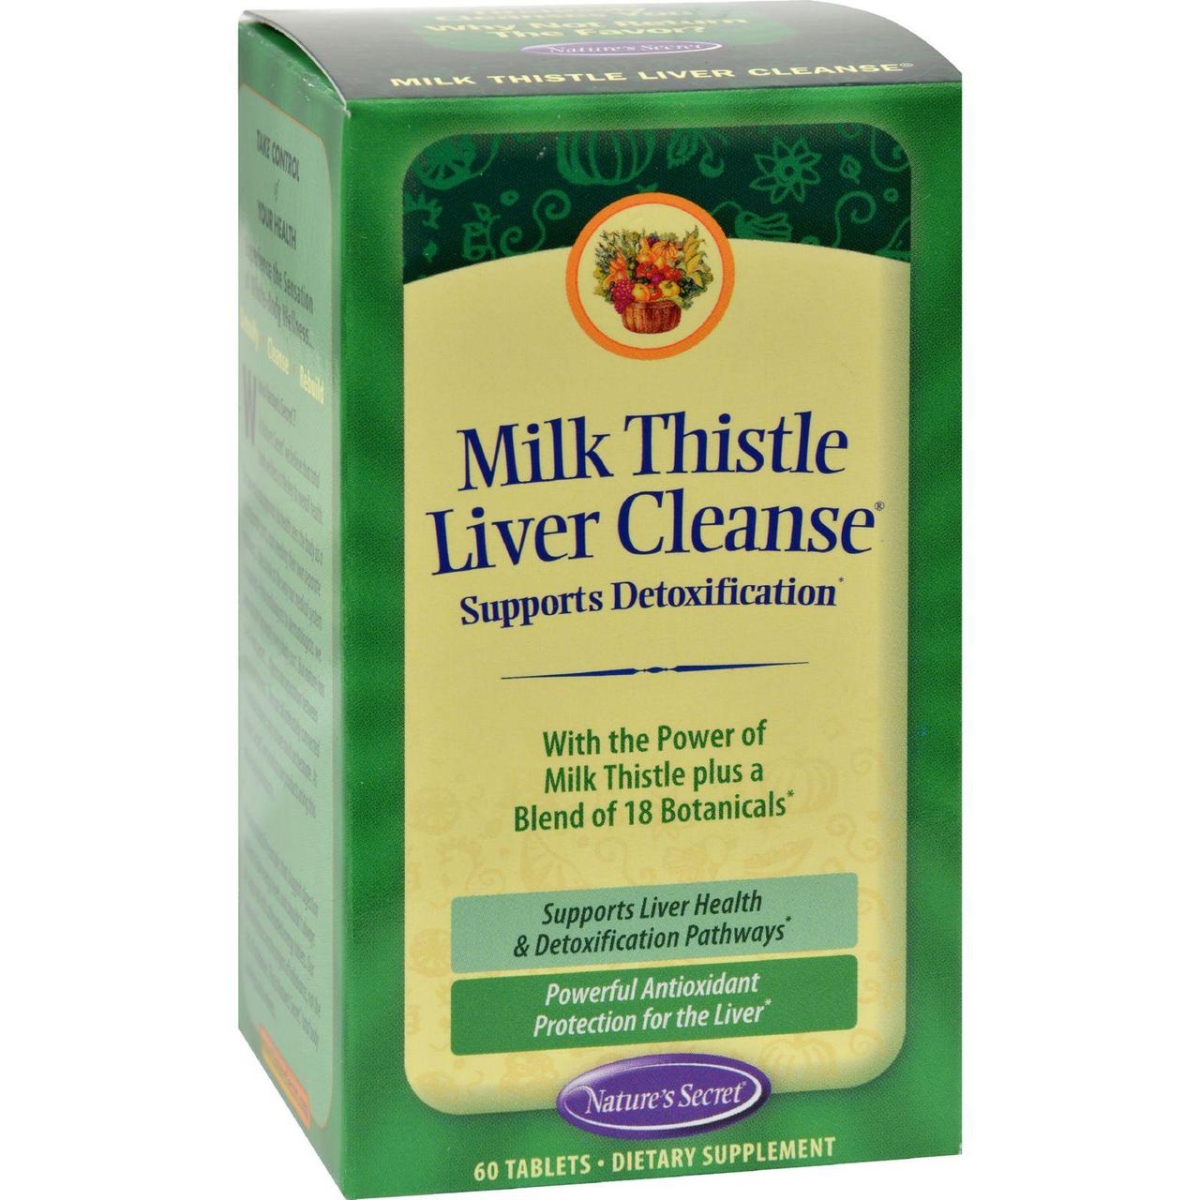 Hg0944736 Milk Thistle Liver Cleanse - 60 Tablets